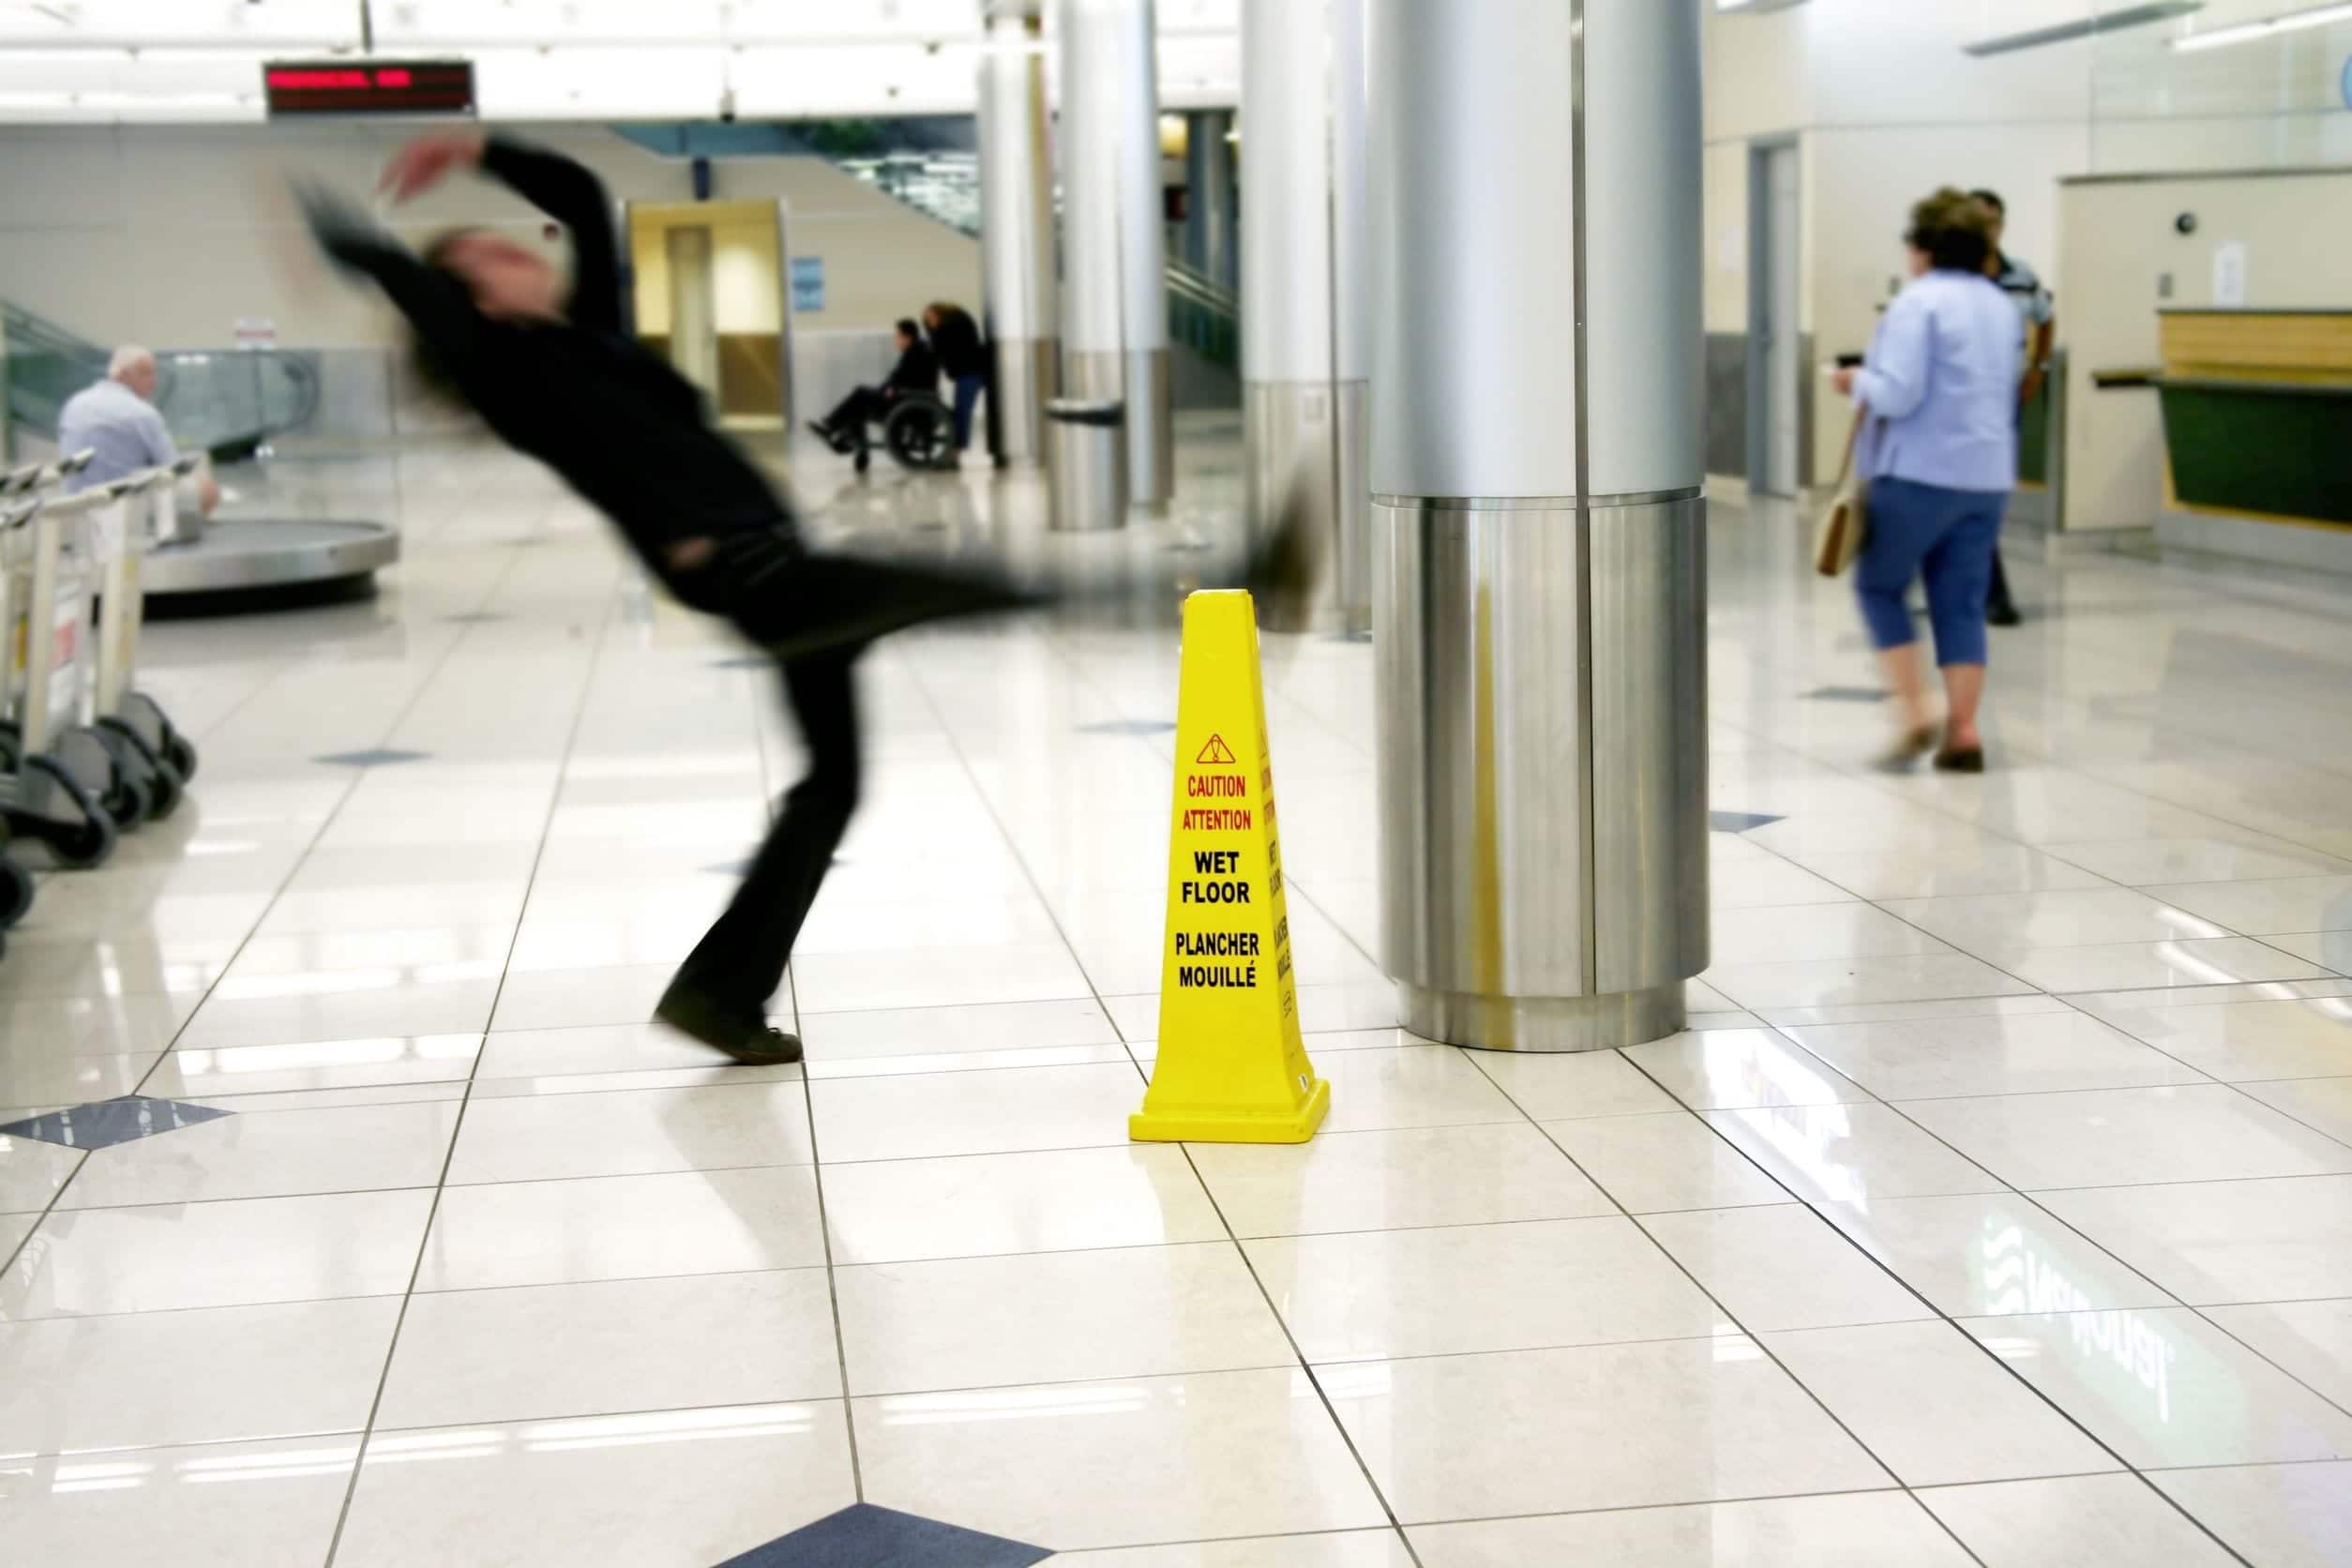 How to Treat Common Slip and Fall Injuries